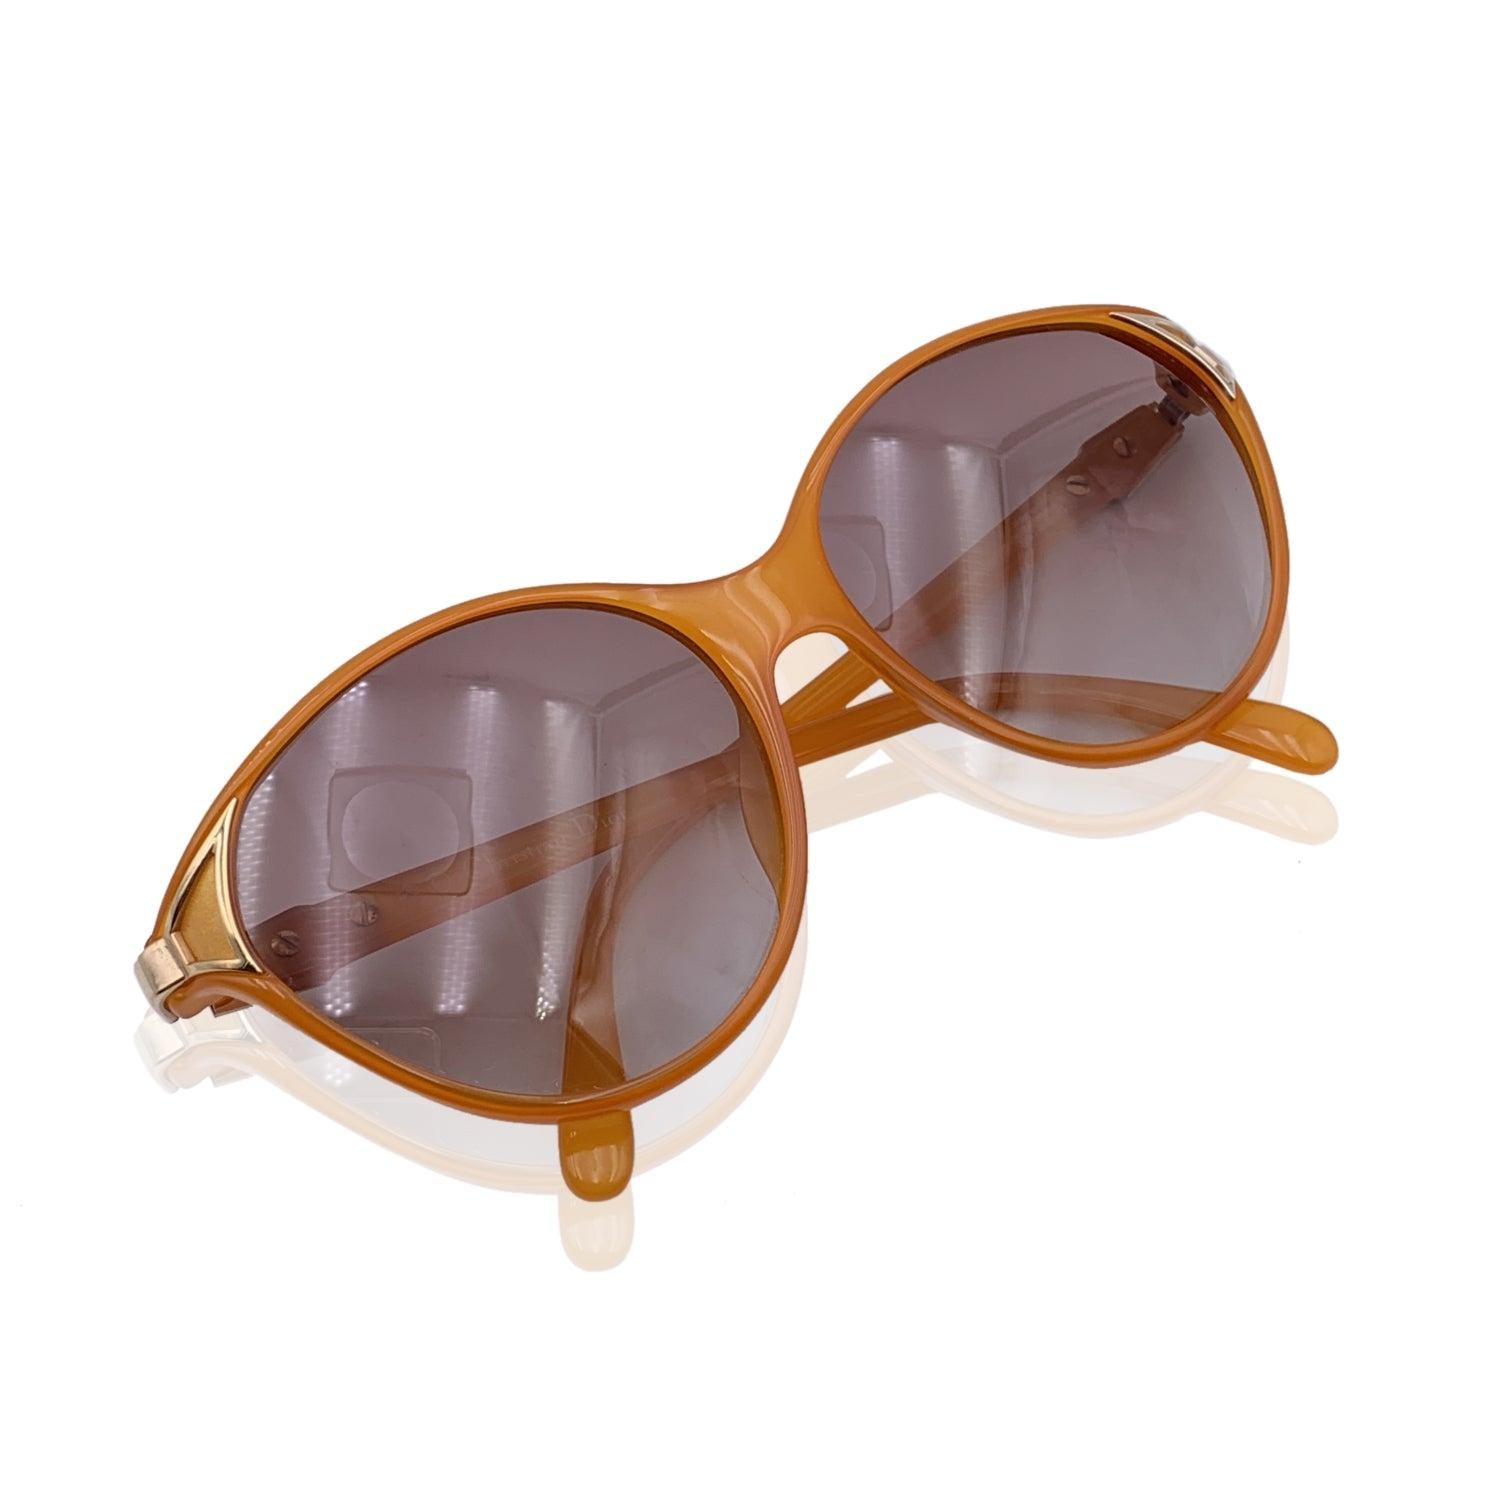 Christian Dior Vintage Orange Acetate Sunglasses 2306 40 55/15 125mm In Excellent Condition For Sale In Rome, Rome